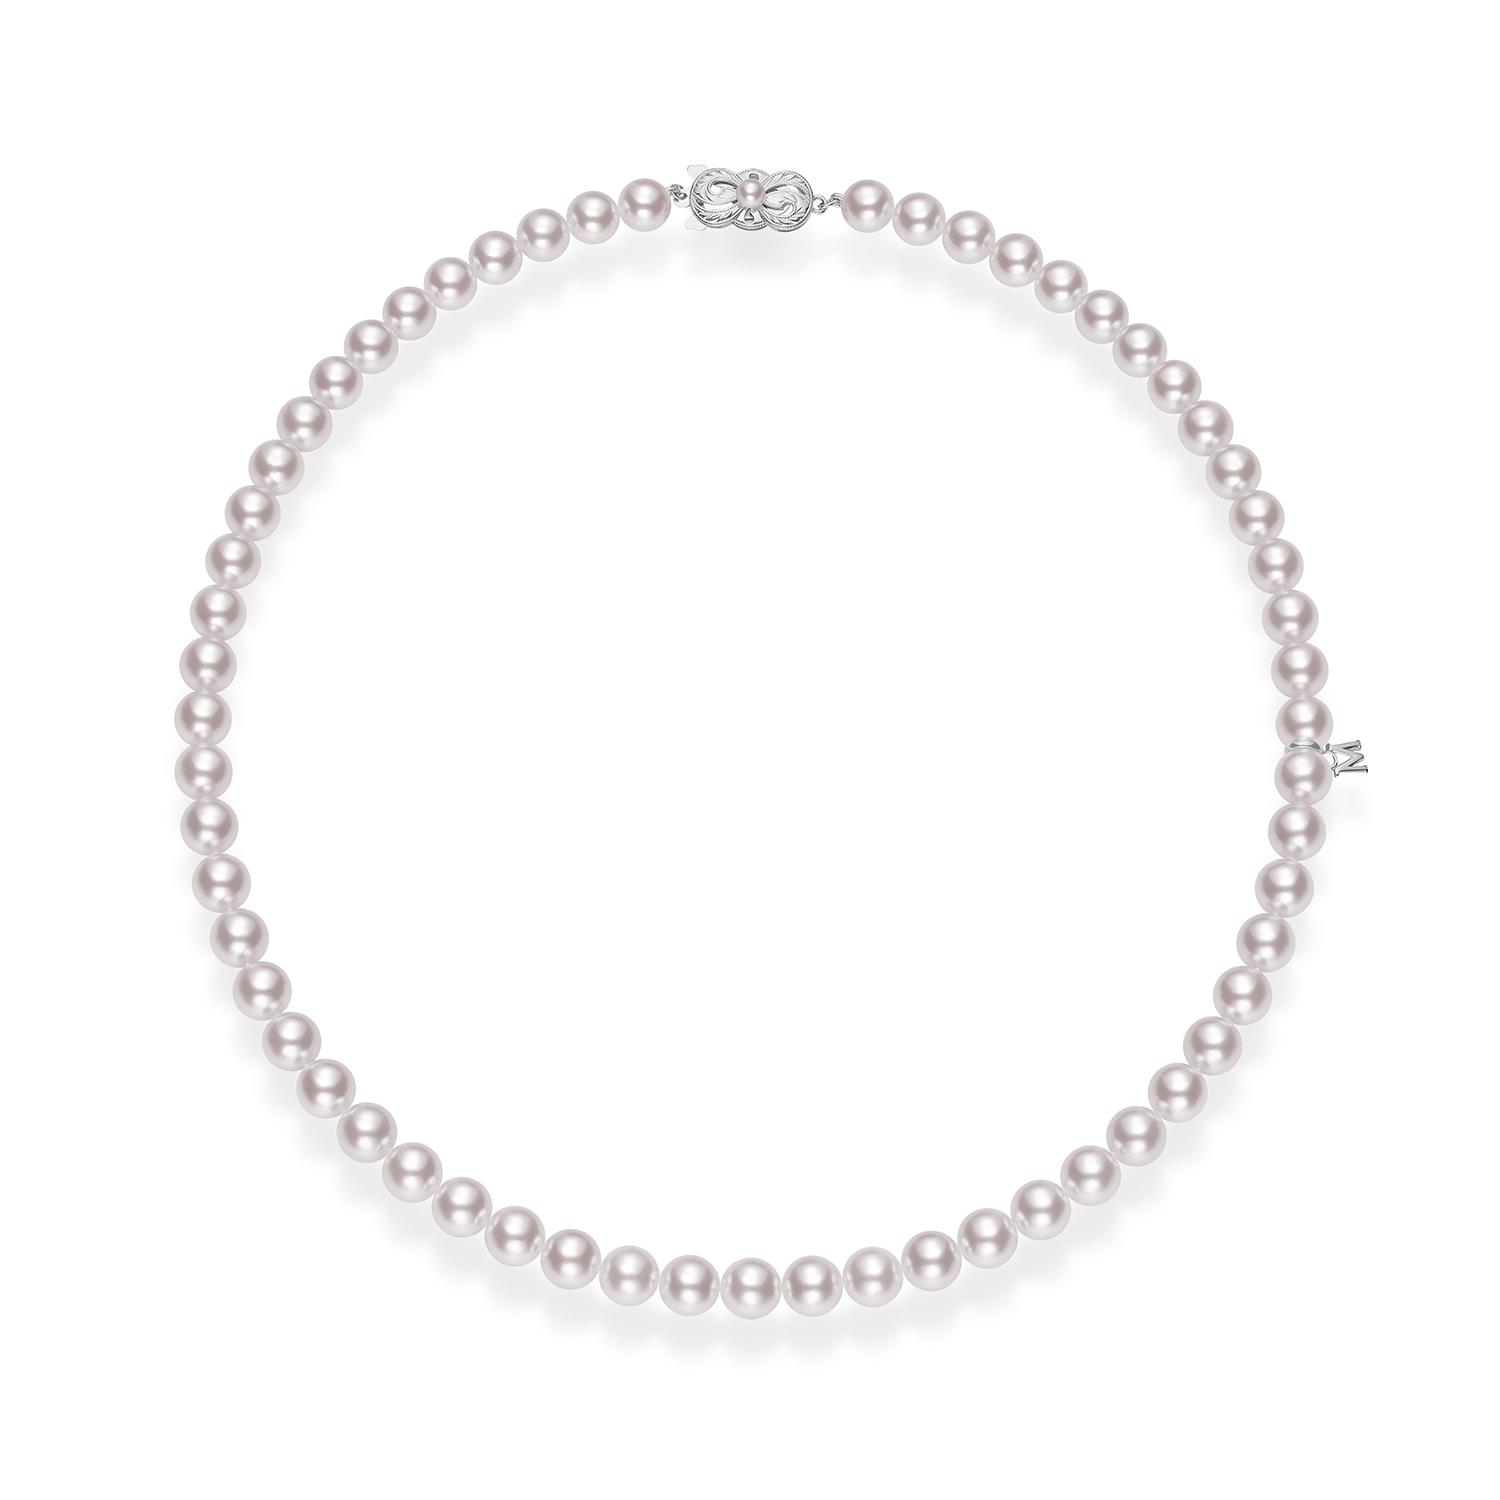 Mikimoto Matinee Length Pearl Strand Necklace, 20"